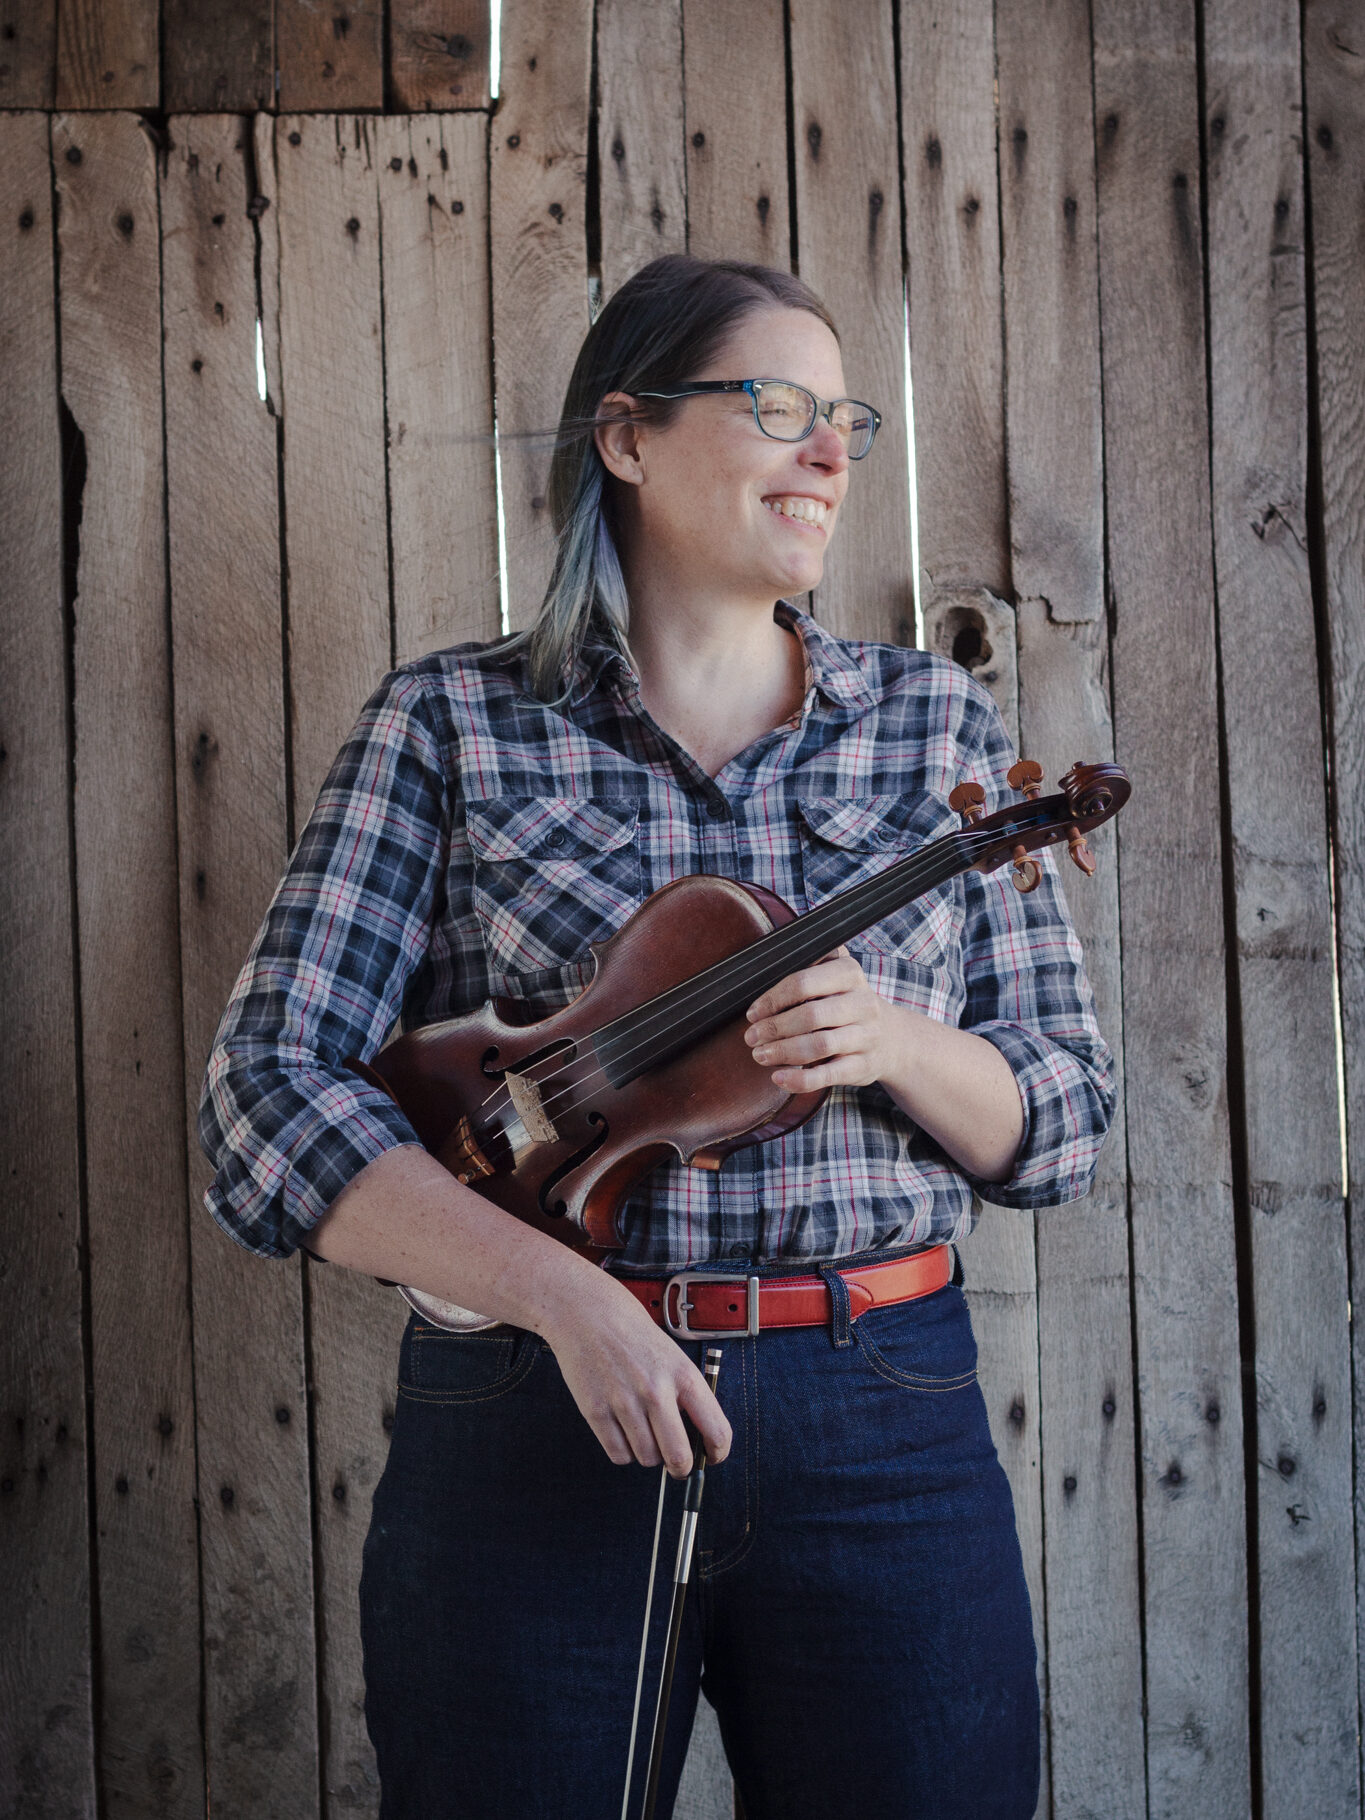 Stacey holding her fiddle while standing in front of a barn wall